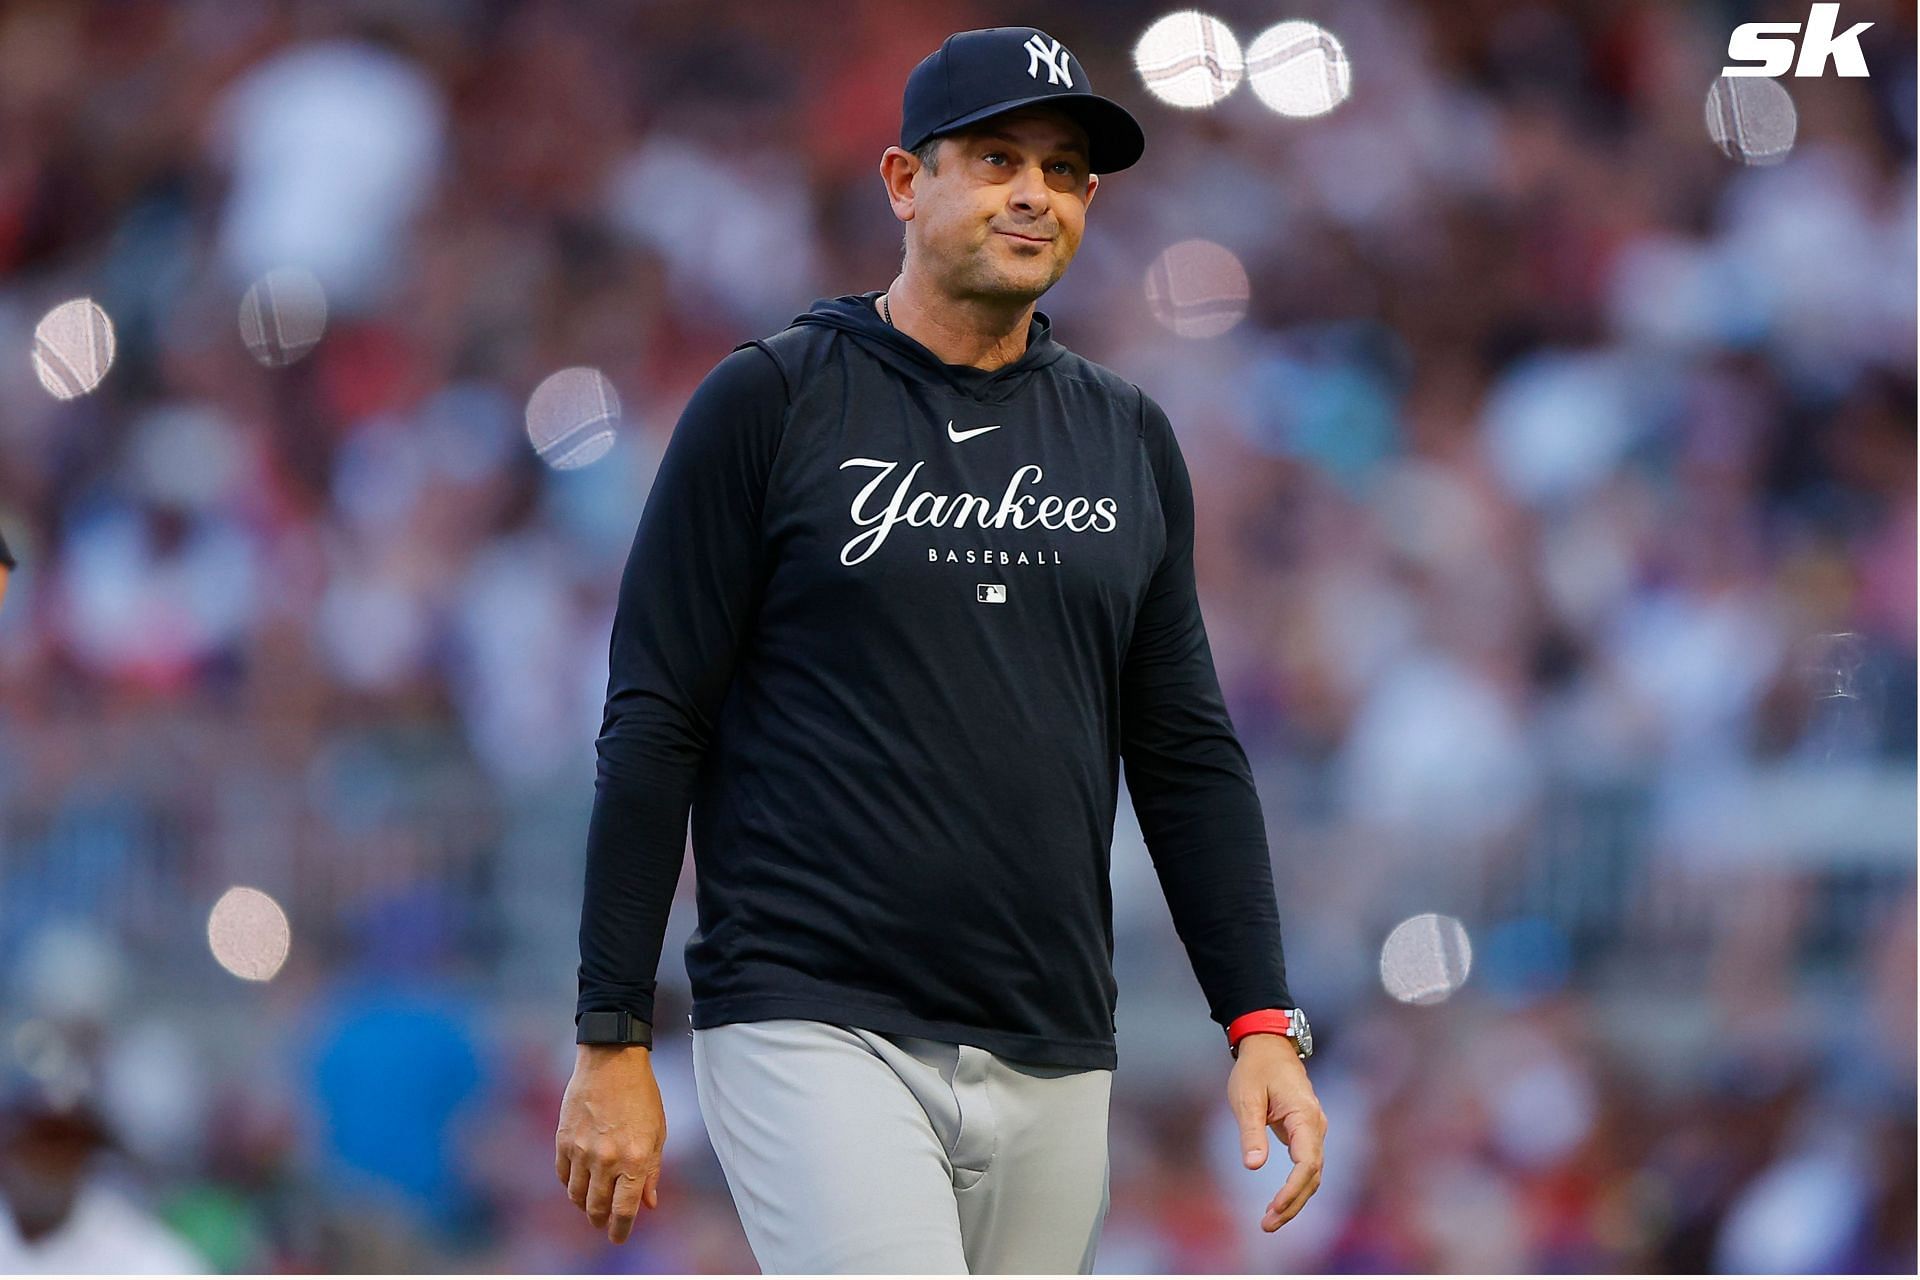 Aaron Boone makes a positive comment for the Orioles